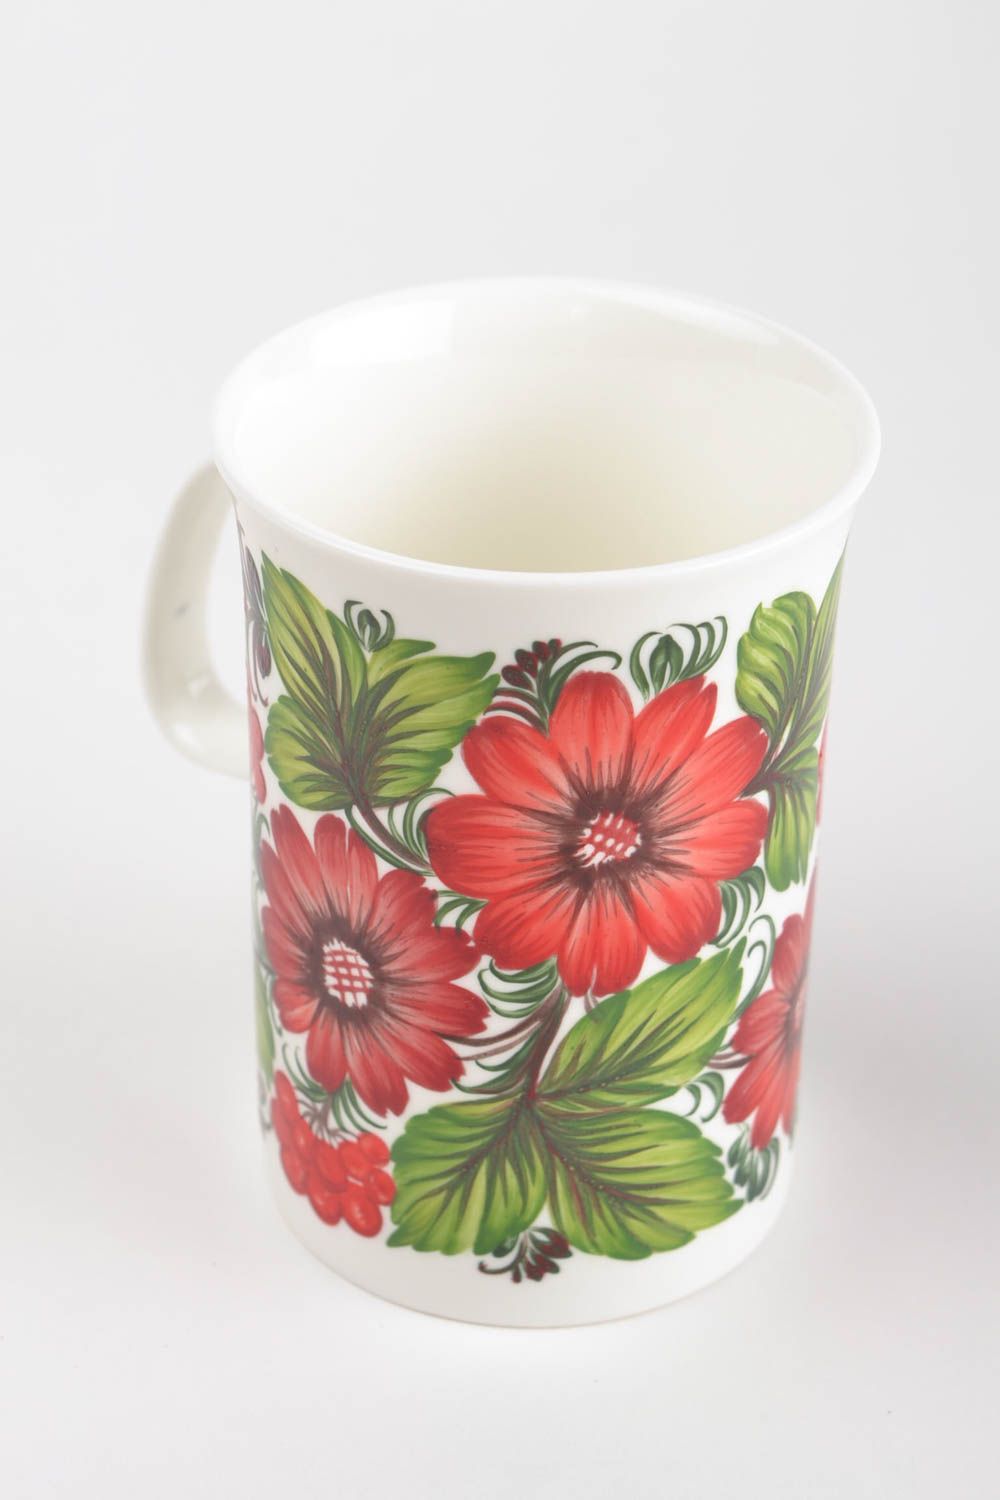 Large 10 oz ceramic porcelain cup with handle and red flowers design photo 5